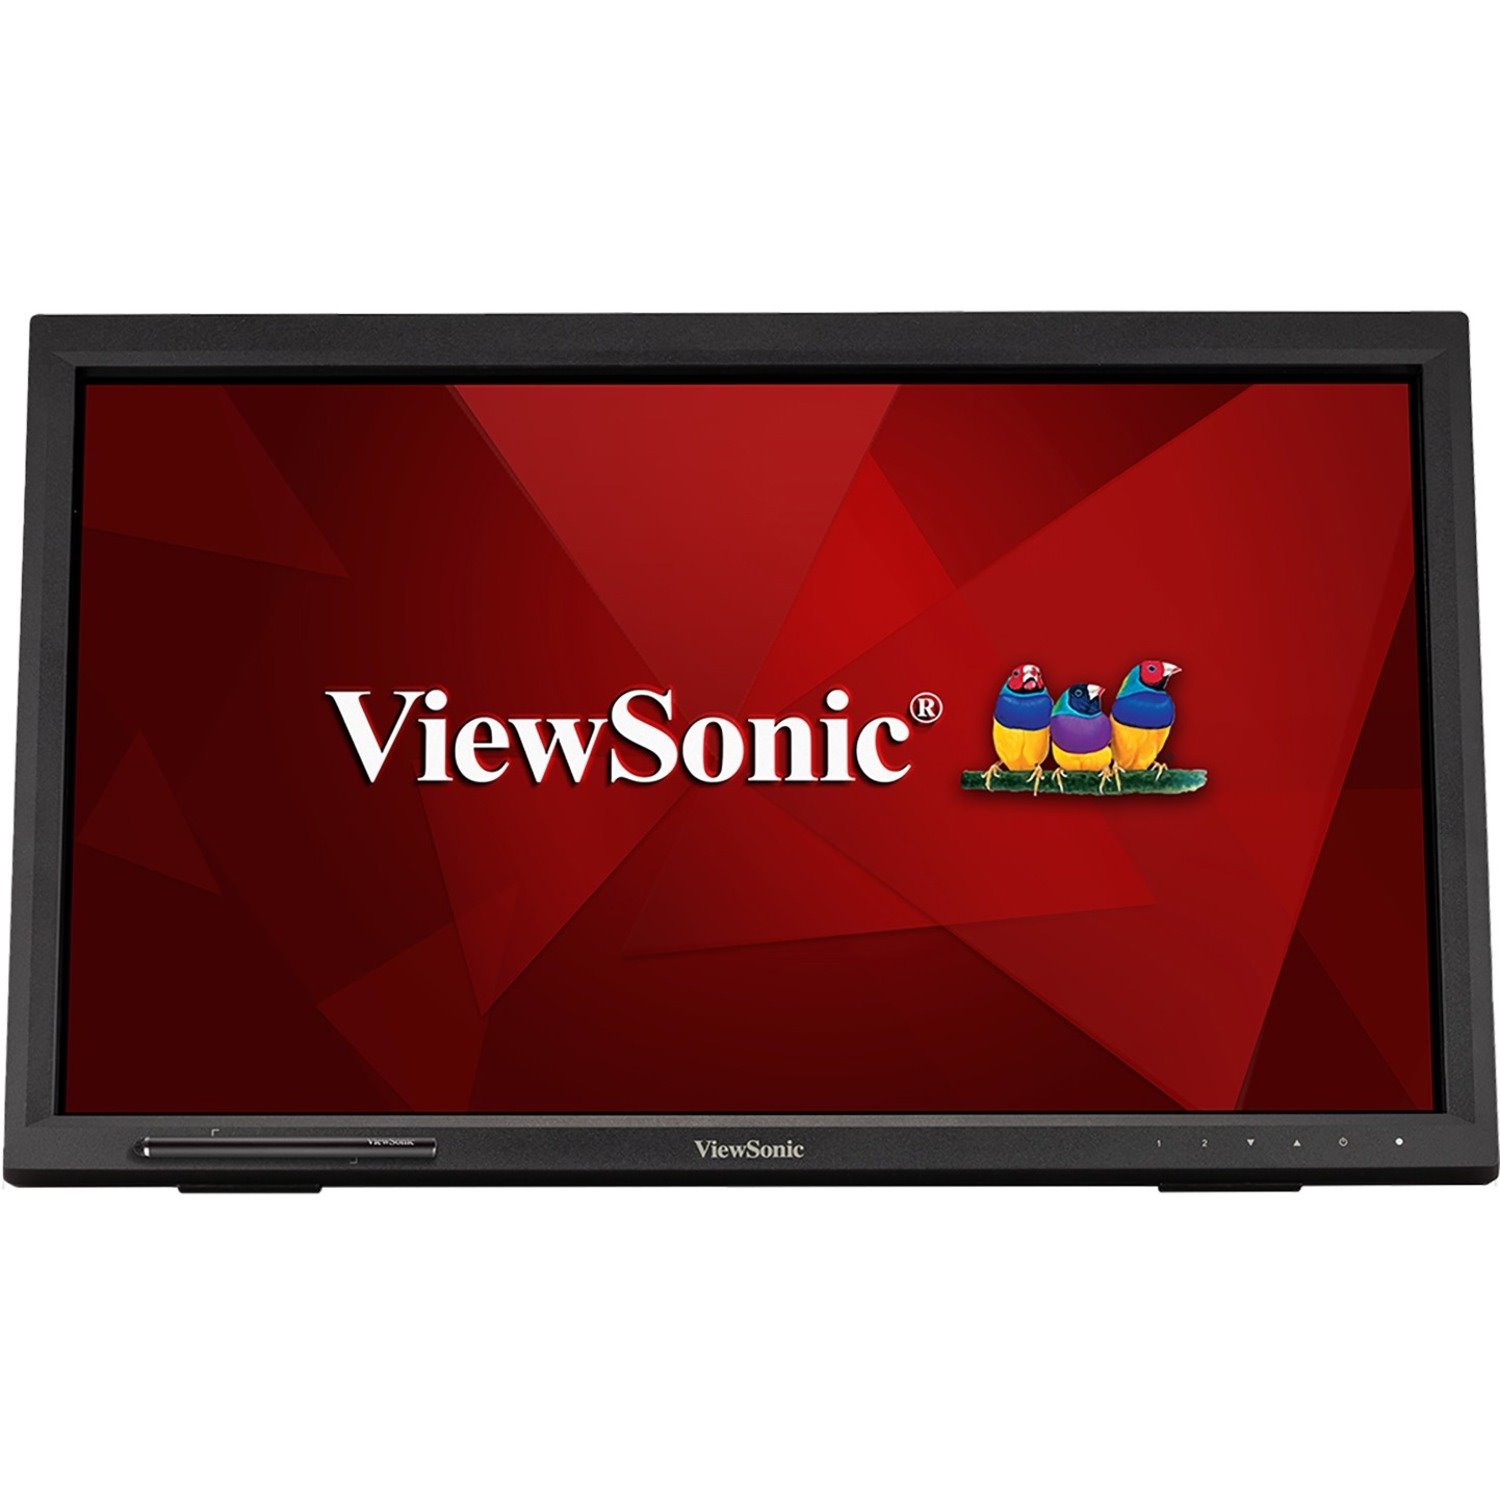 ViewSonic TD2223 22" 1080p 10-Point Multi IR Touch Monitor with HDMI, VGA, and DVI